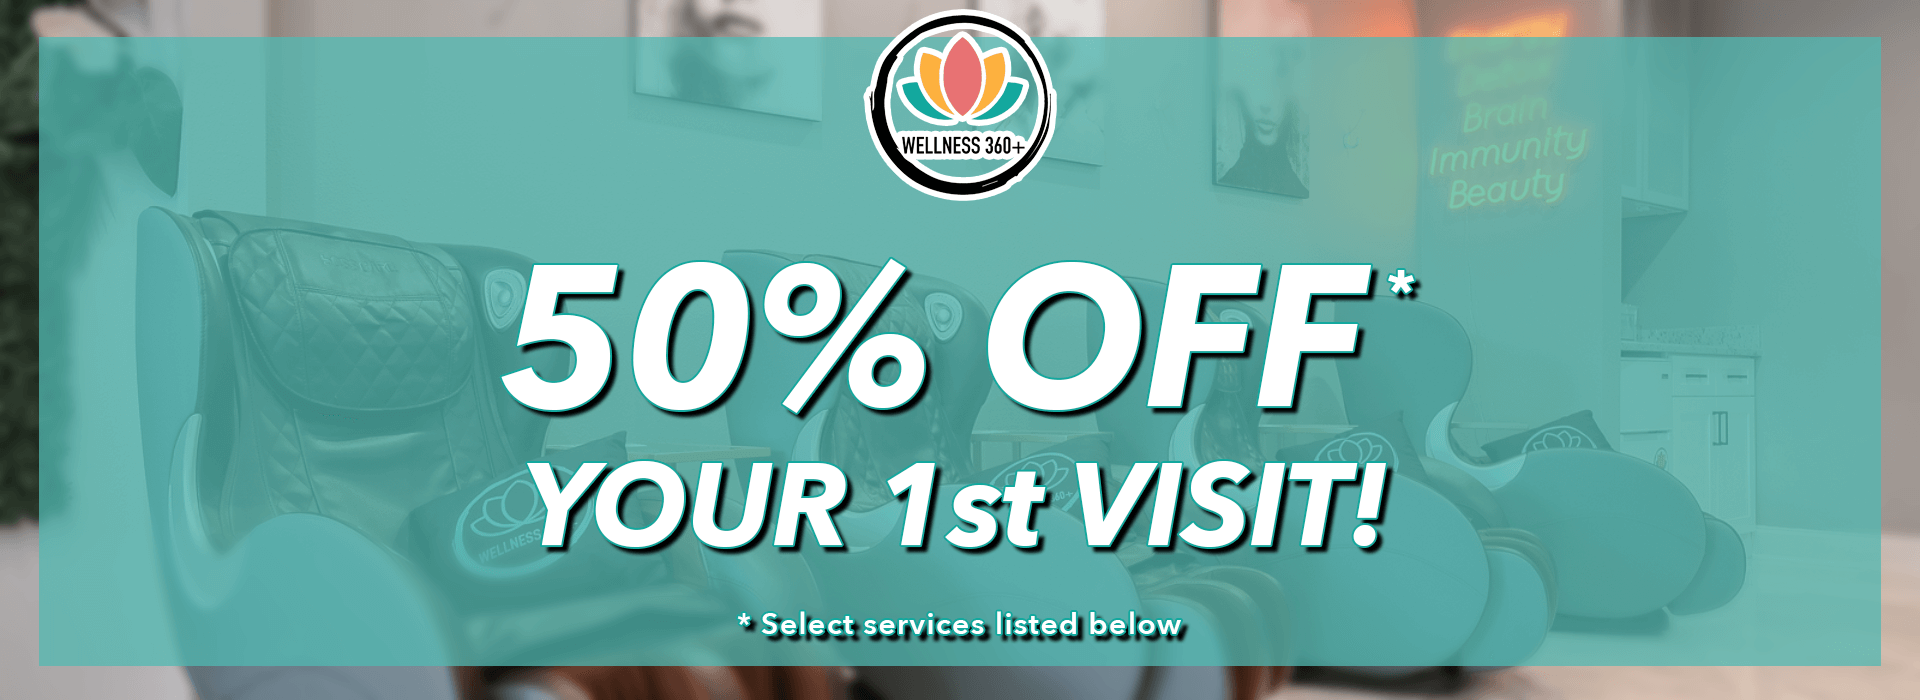 50% off first visit promotion at Wellness 360 Plus in Tampa, Florida